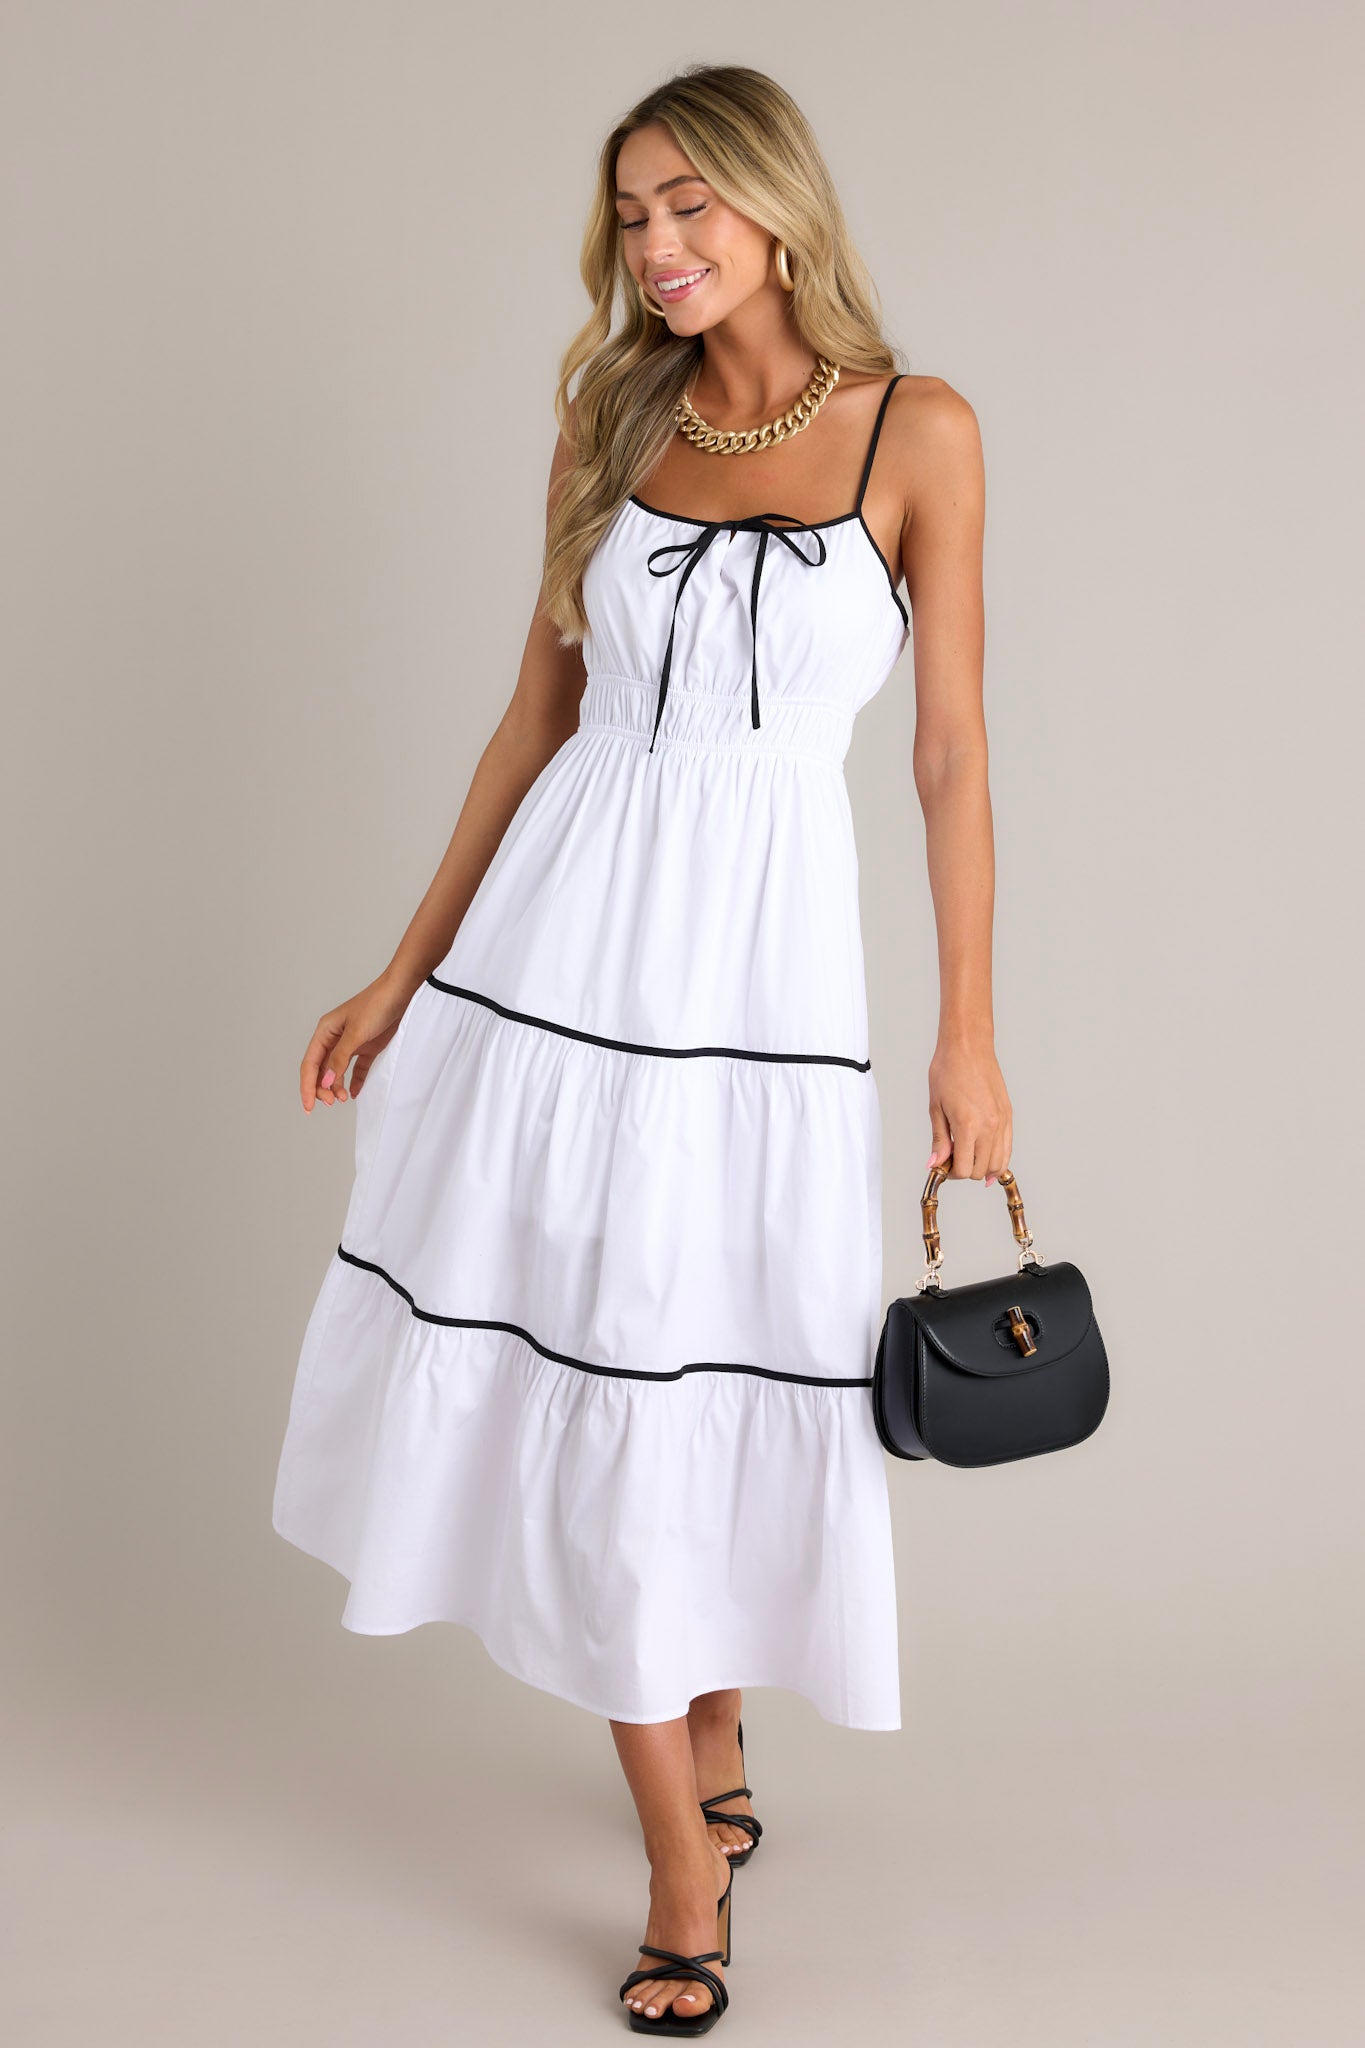 Action shot of a white midi dress displaying the fit and movement, highlighting the square neckline, thin adjustable straps, self-tie bust feature, elastic waist, contrasting tiers, and flowing silhouette.